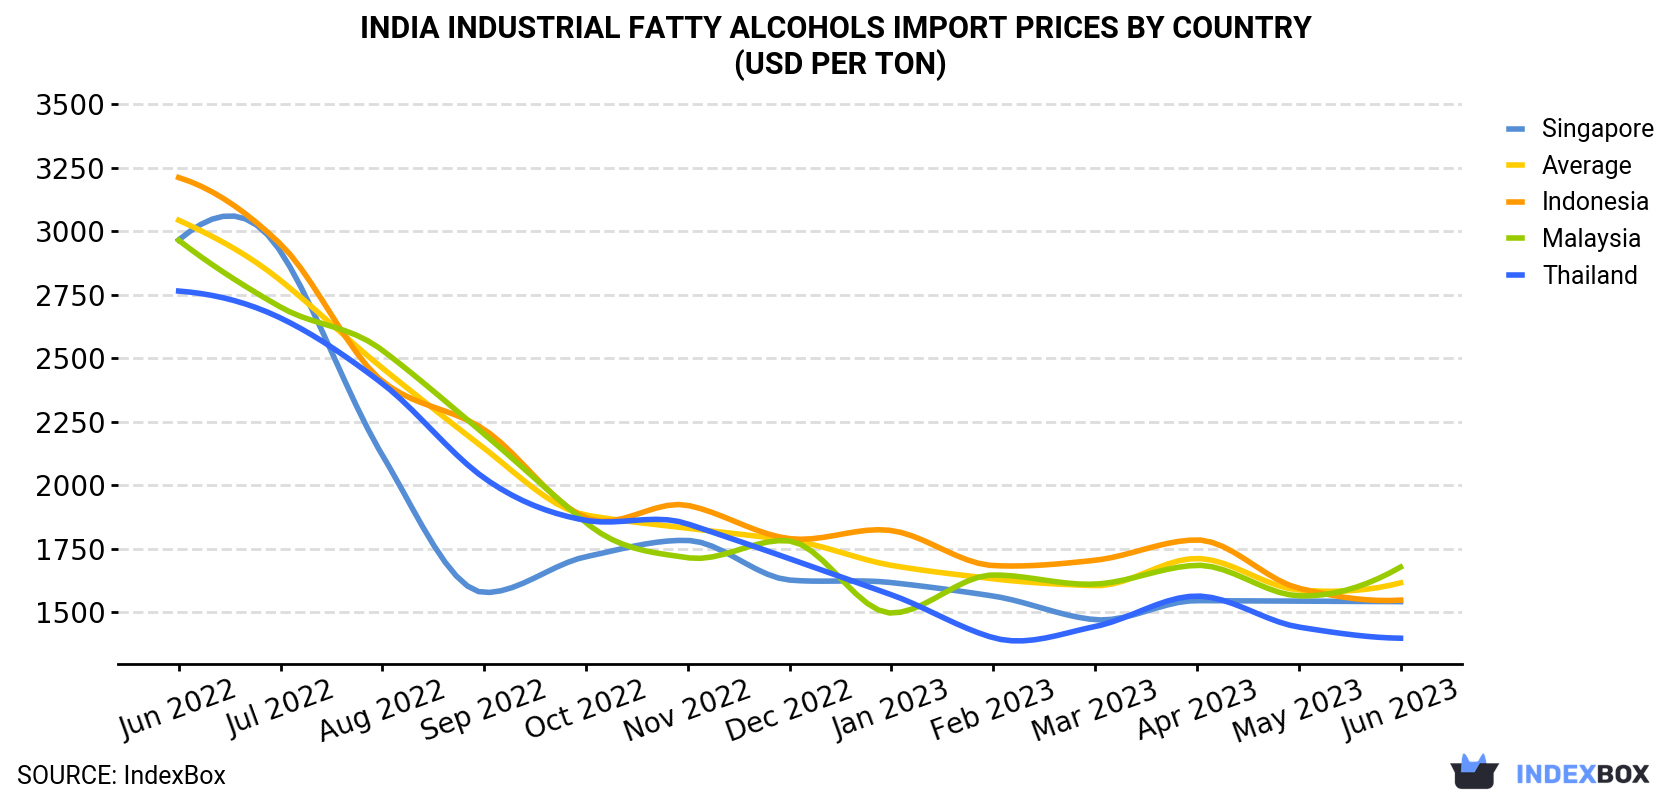 India Industrial Fatty Alcohols Import Prices By Country (USD Per Ton)